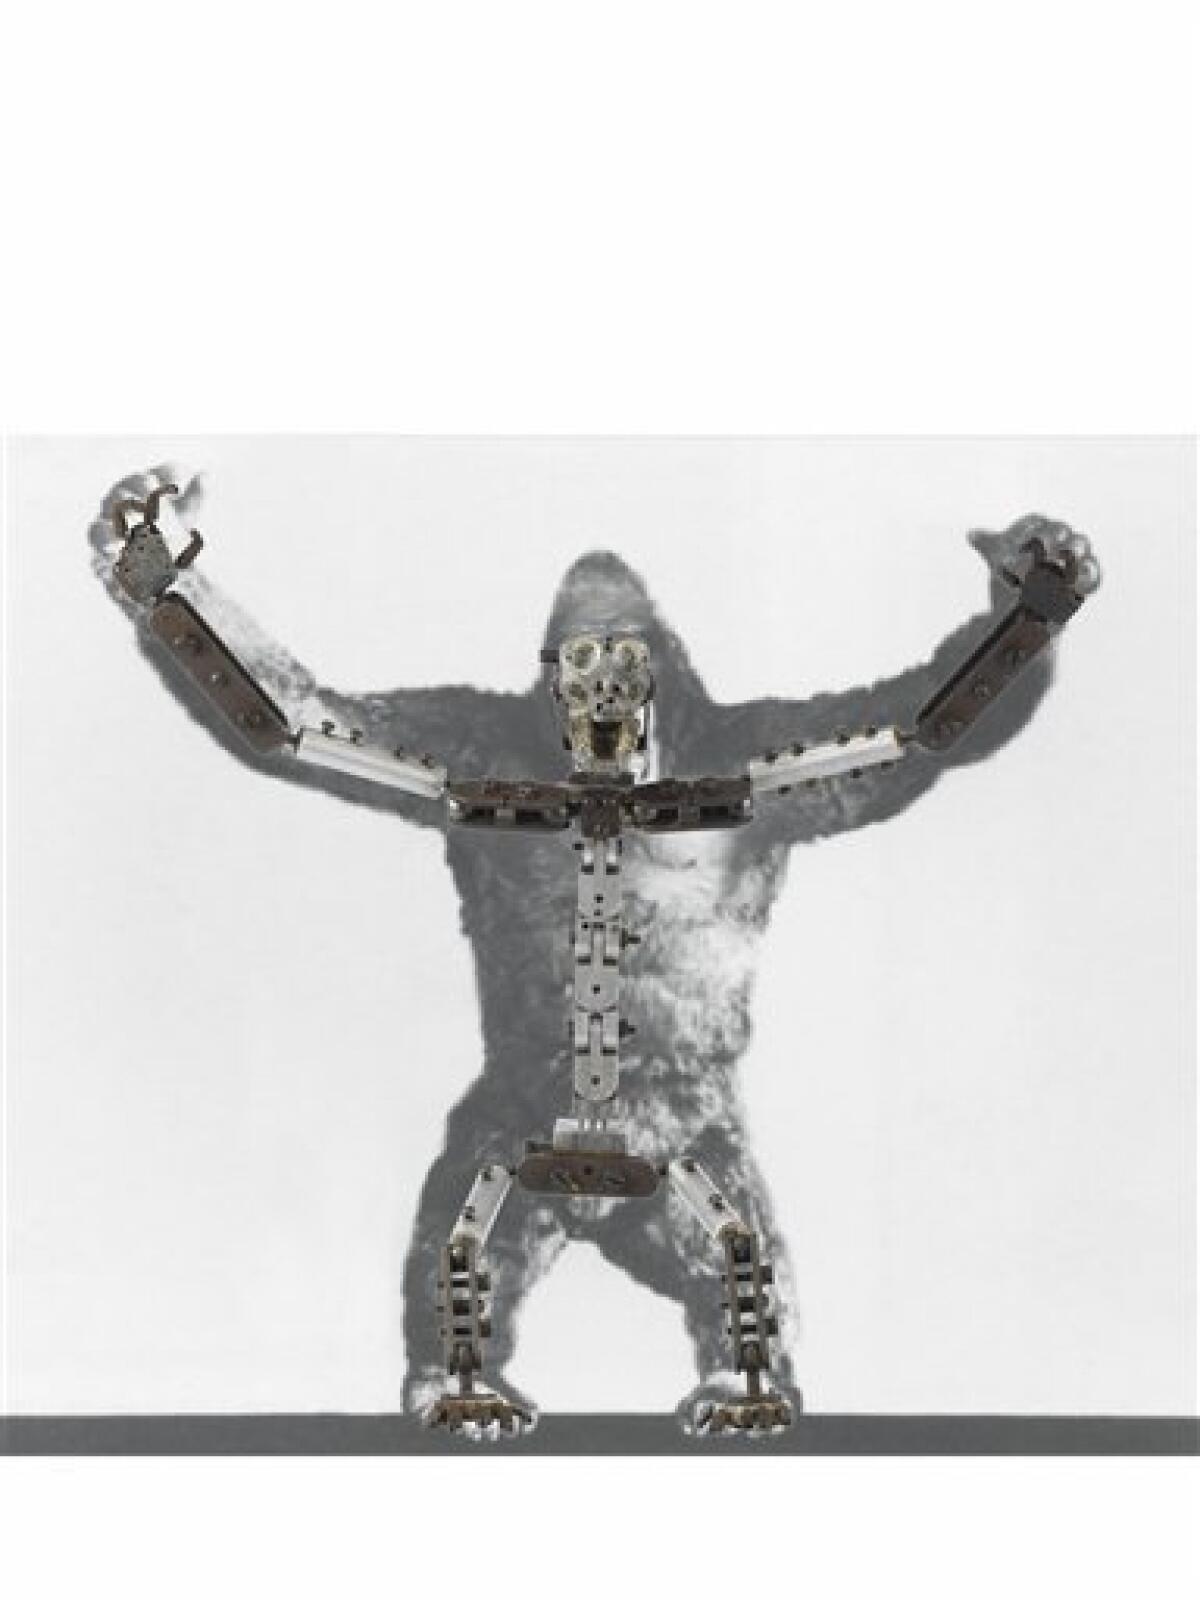 King Kong figurine used in 1930s movie up for sale - The San Diego  Union-Tribune